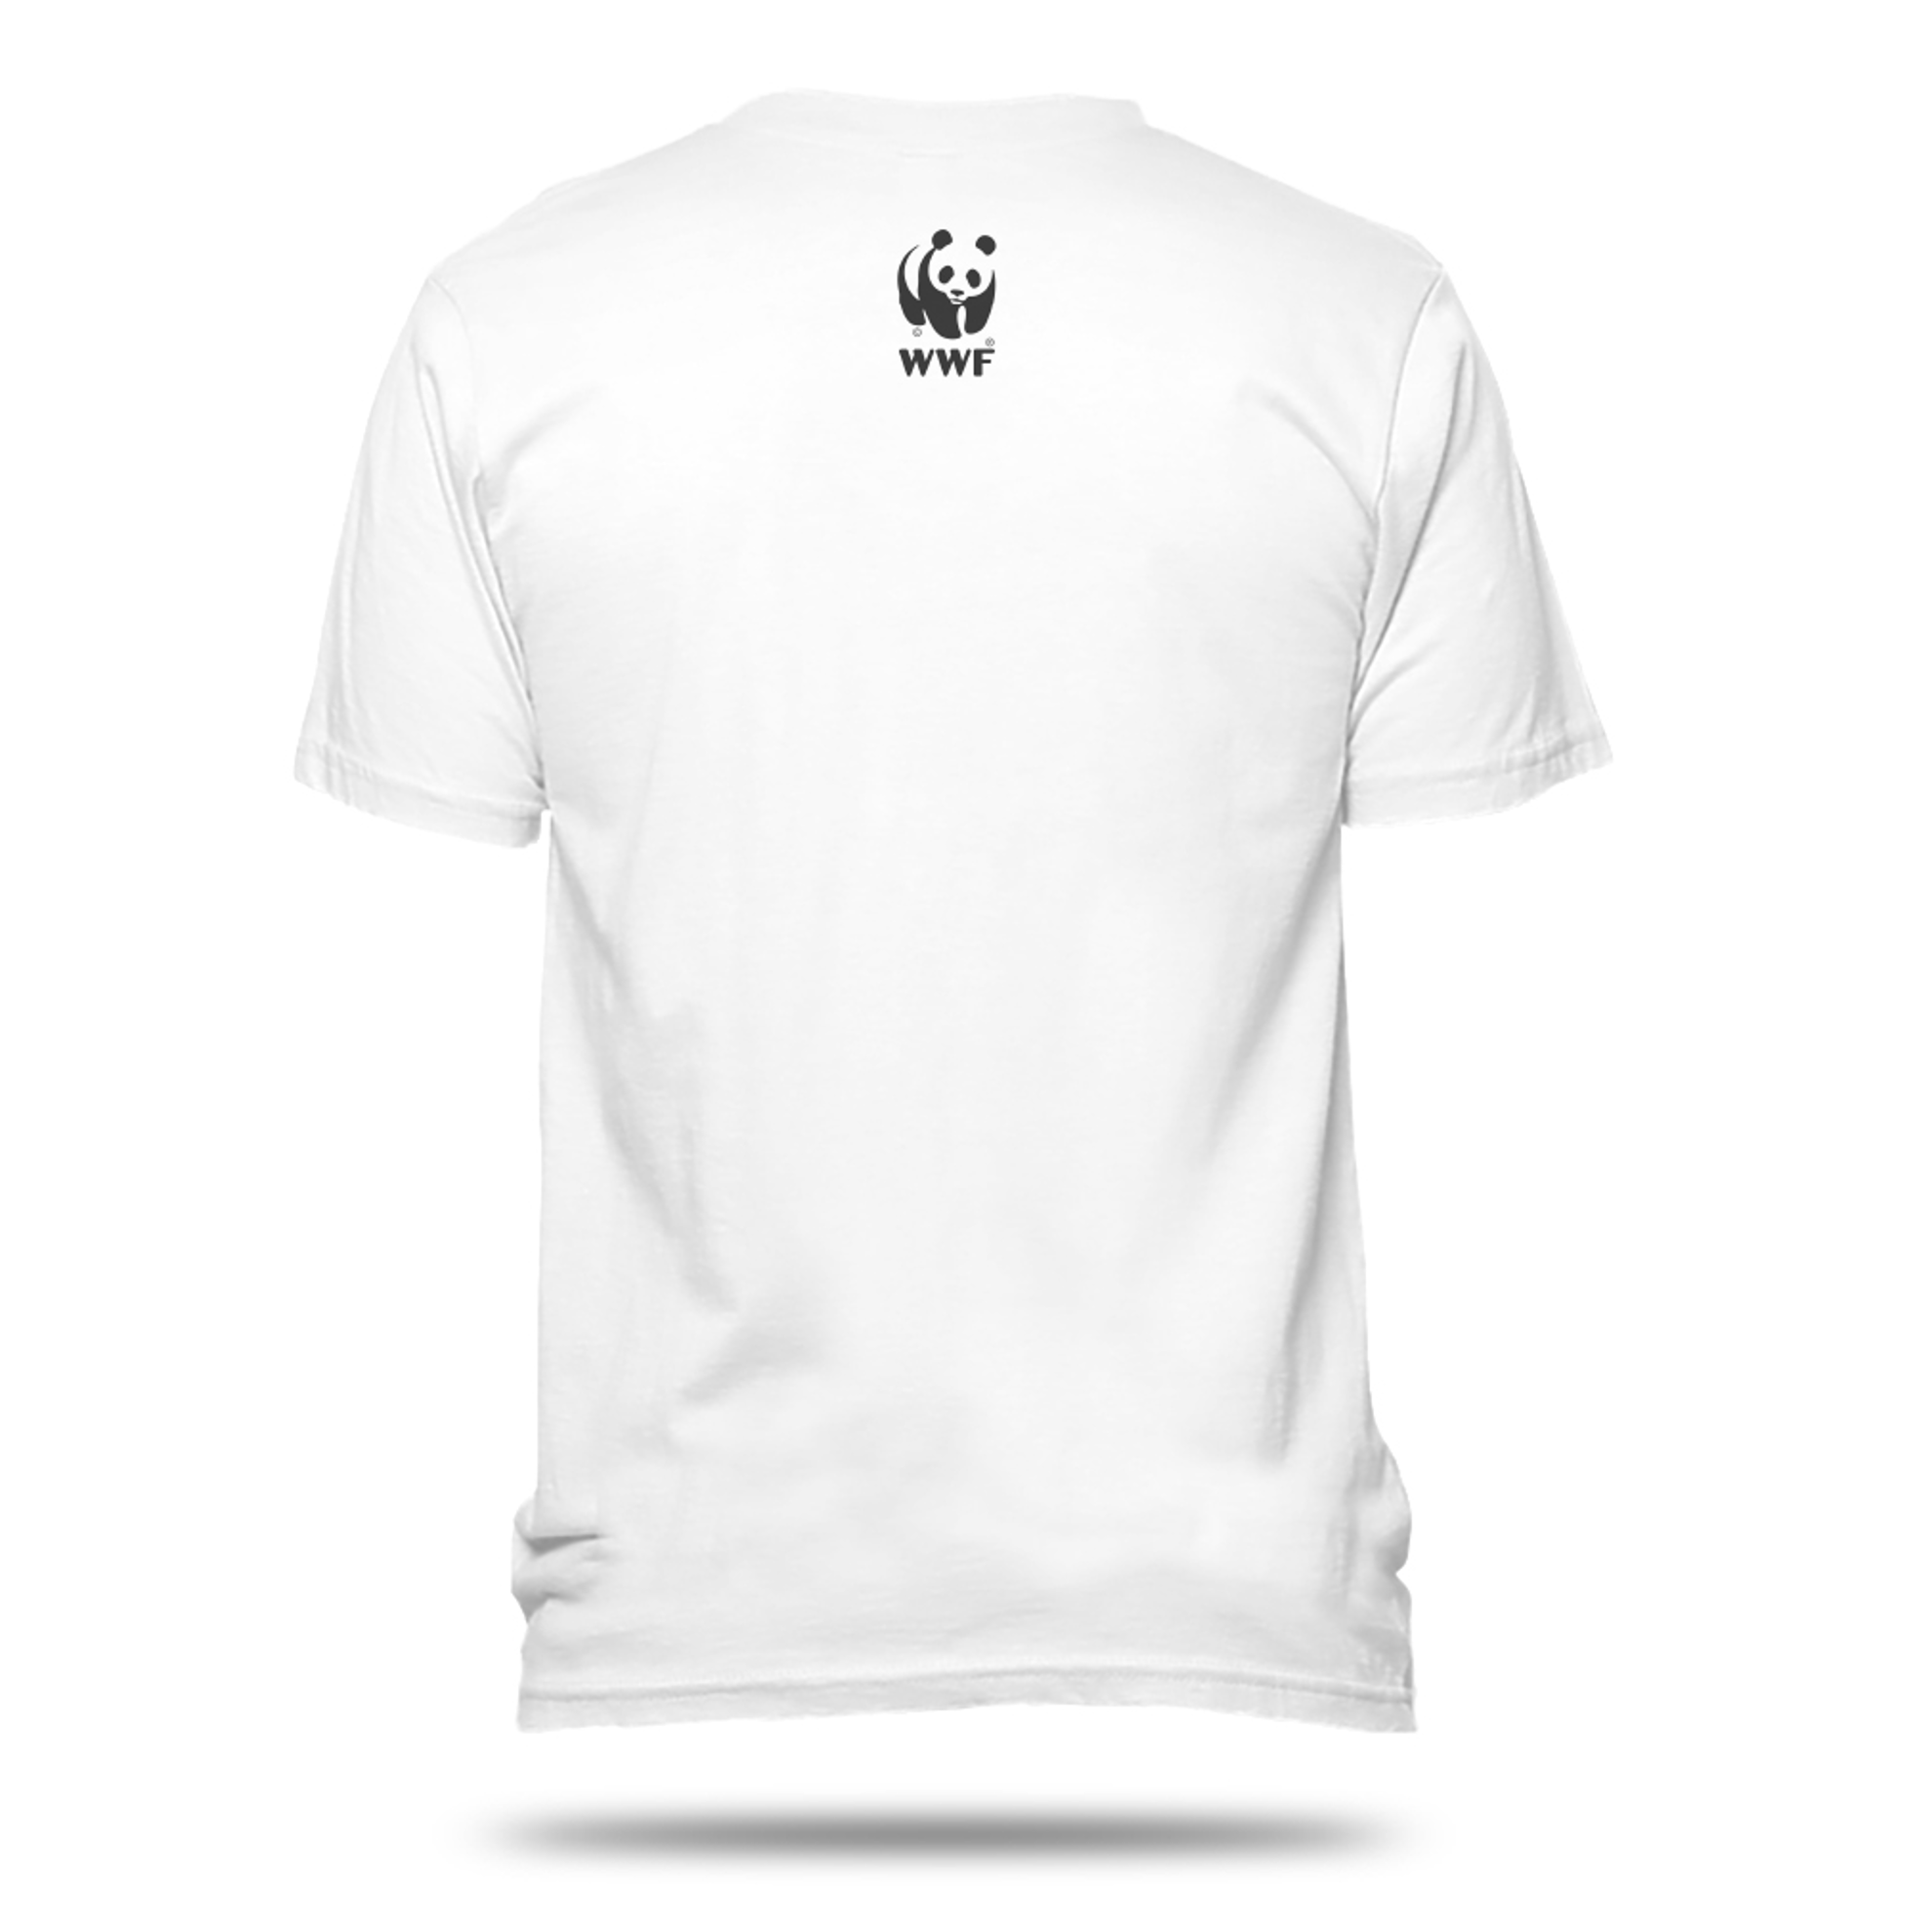 Back view of the Regenerate Canada white t-shirt. Includes the WWF panda logo at the top, centre.